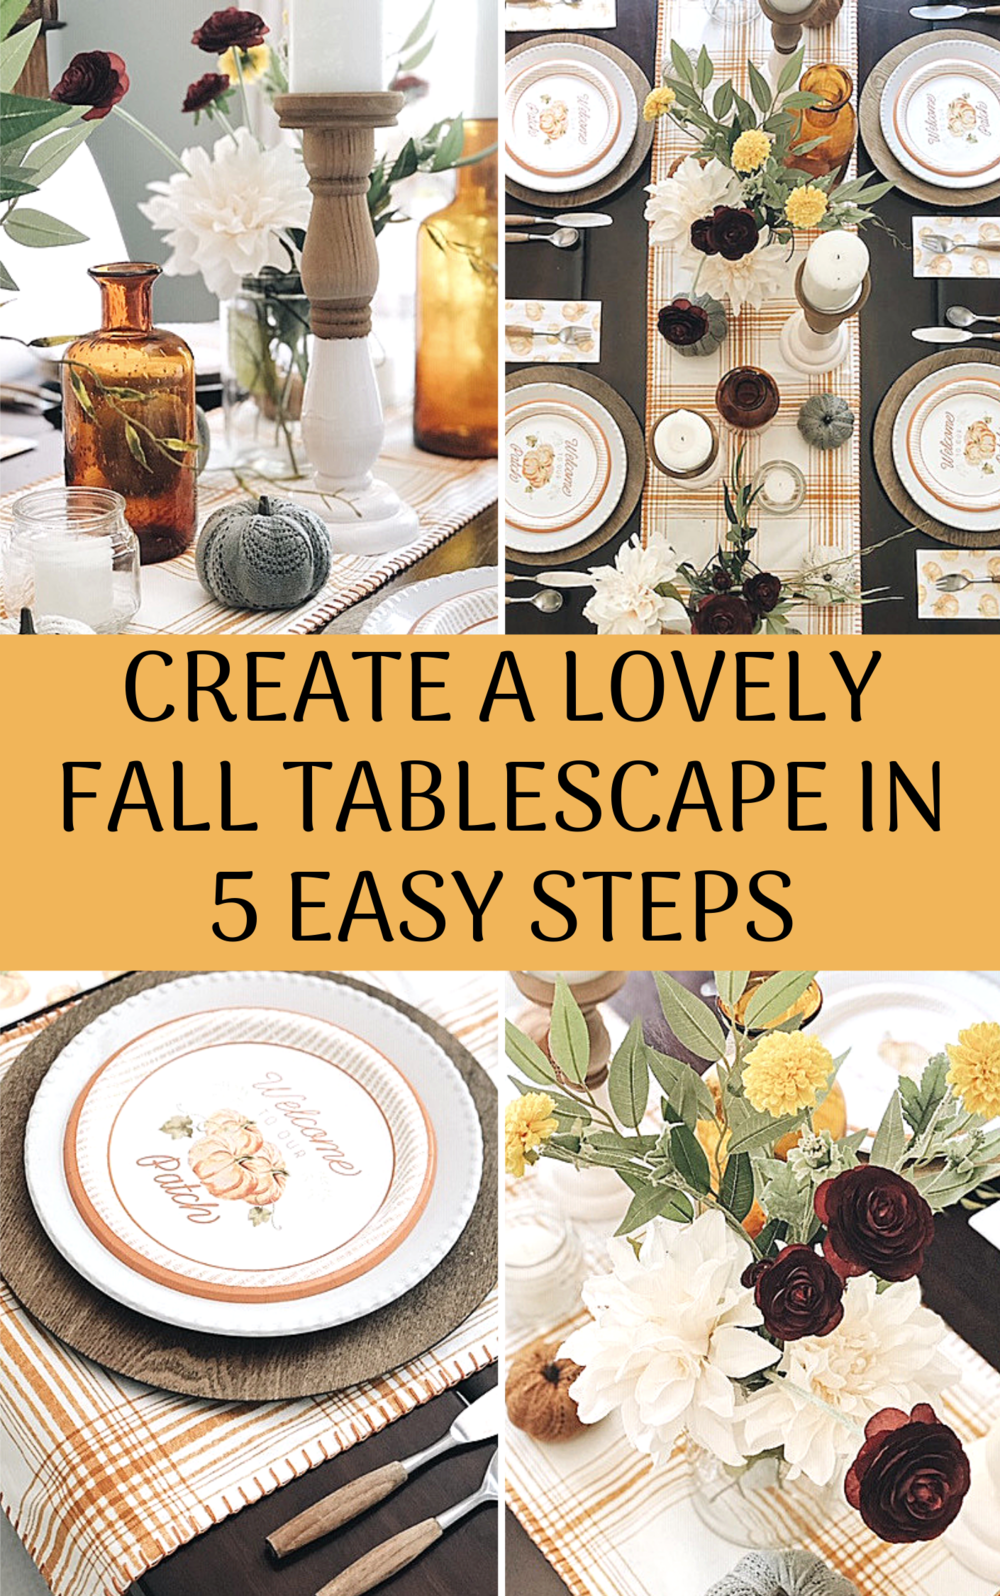 Create A Lovely Fall Tablescape In 5 Easy Steps.png